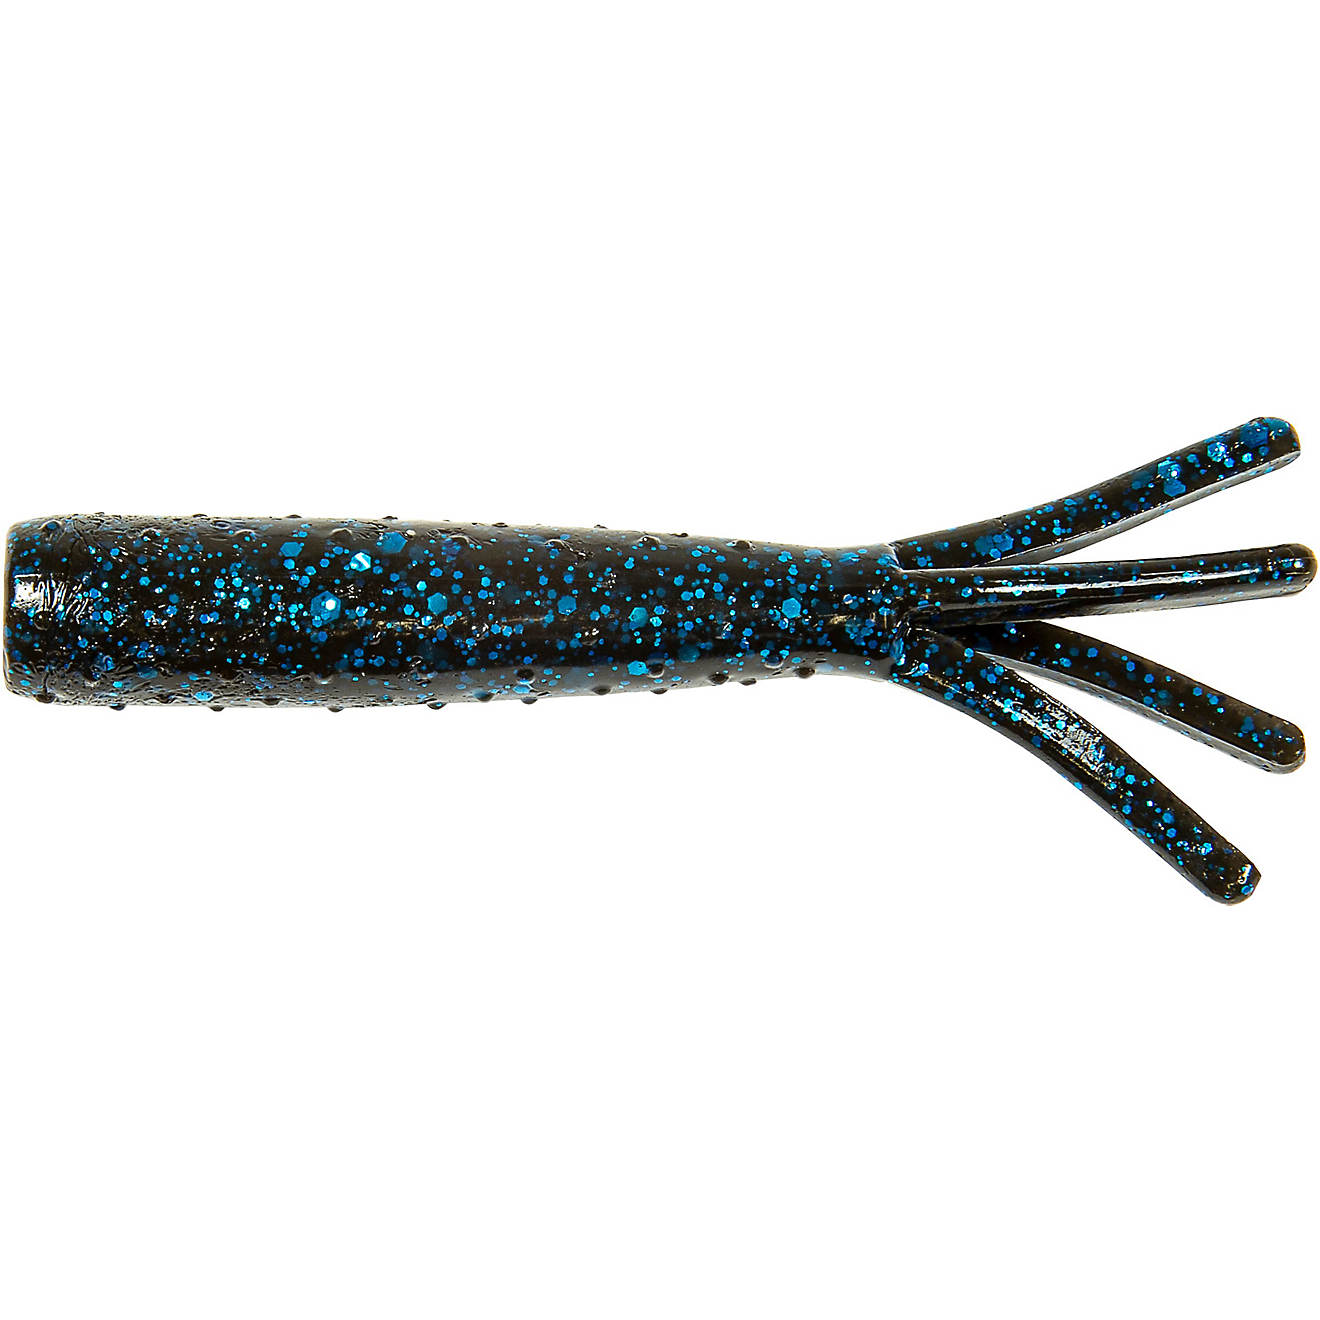 Z-Man TRD Ticklerz 2-3/4 in Soft Baits 8-Pack                                                                                    - view number 1